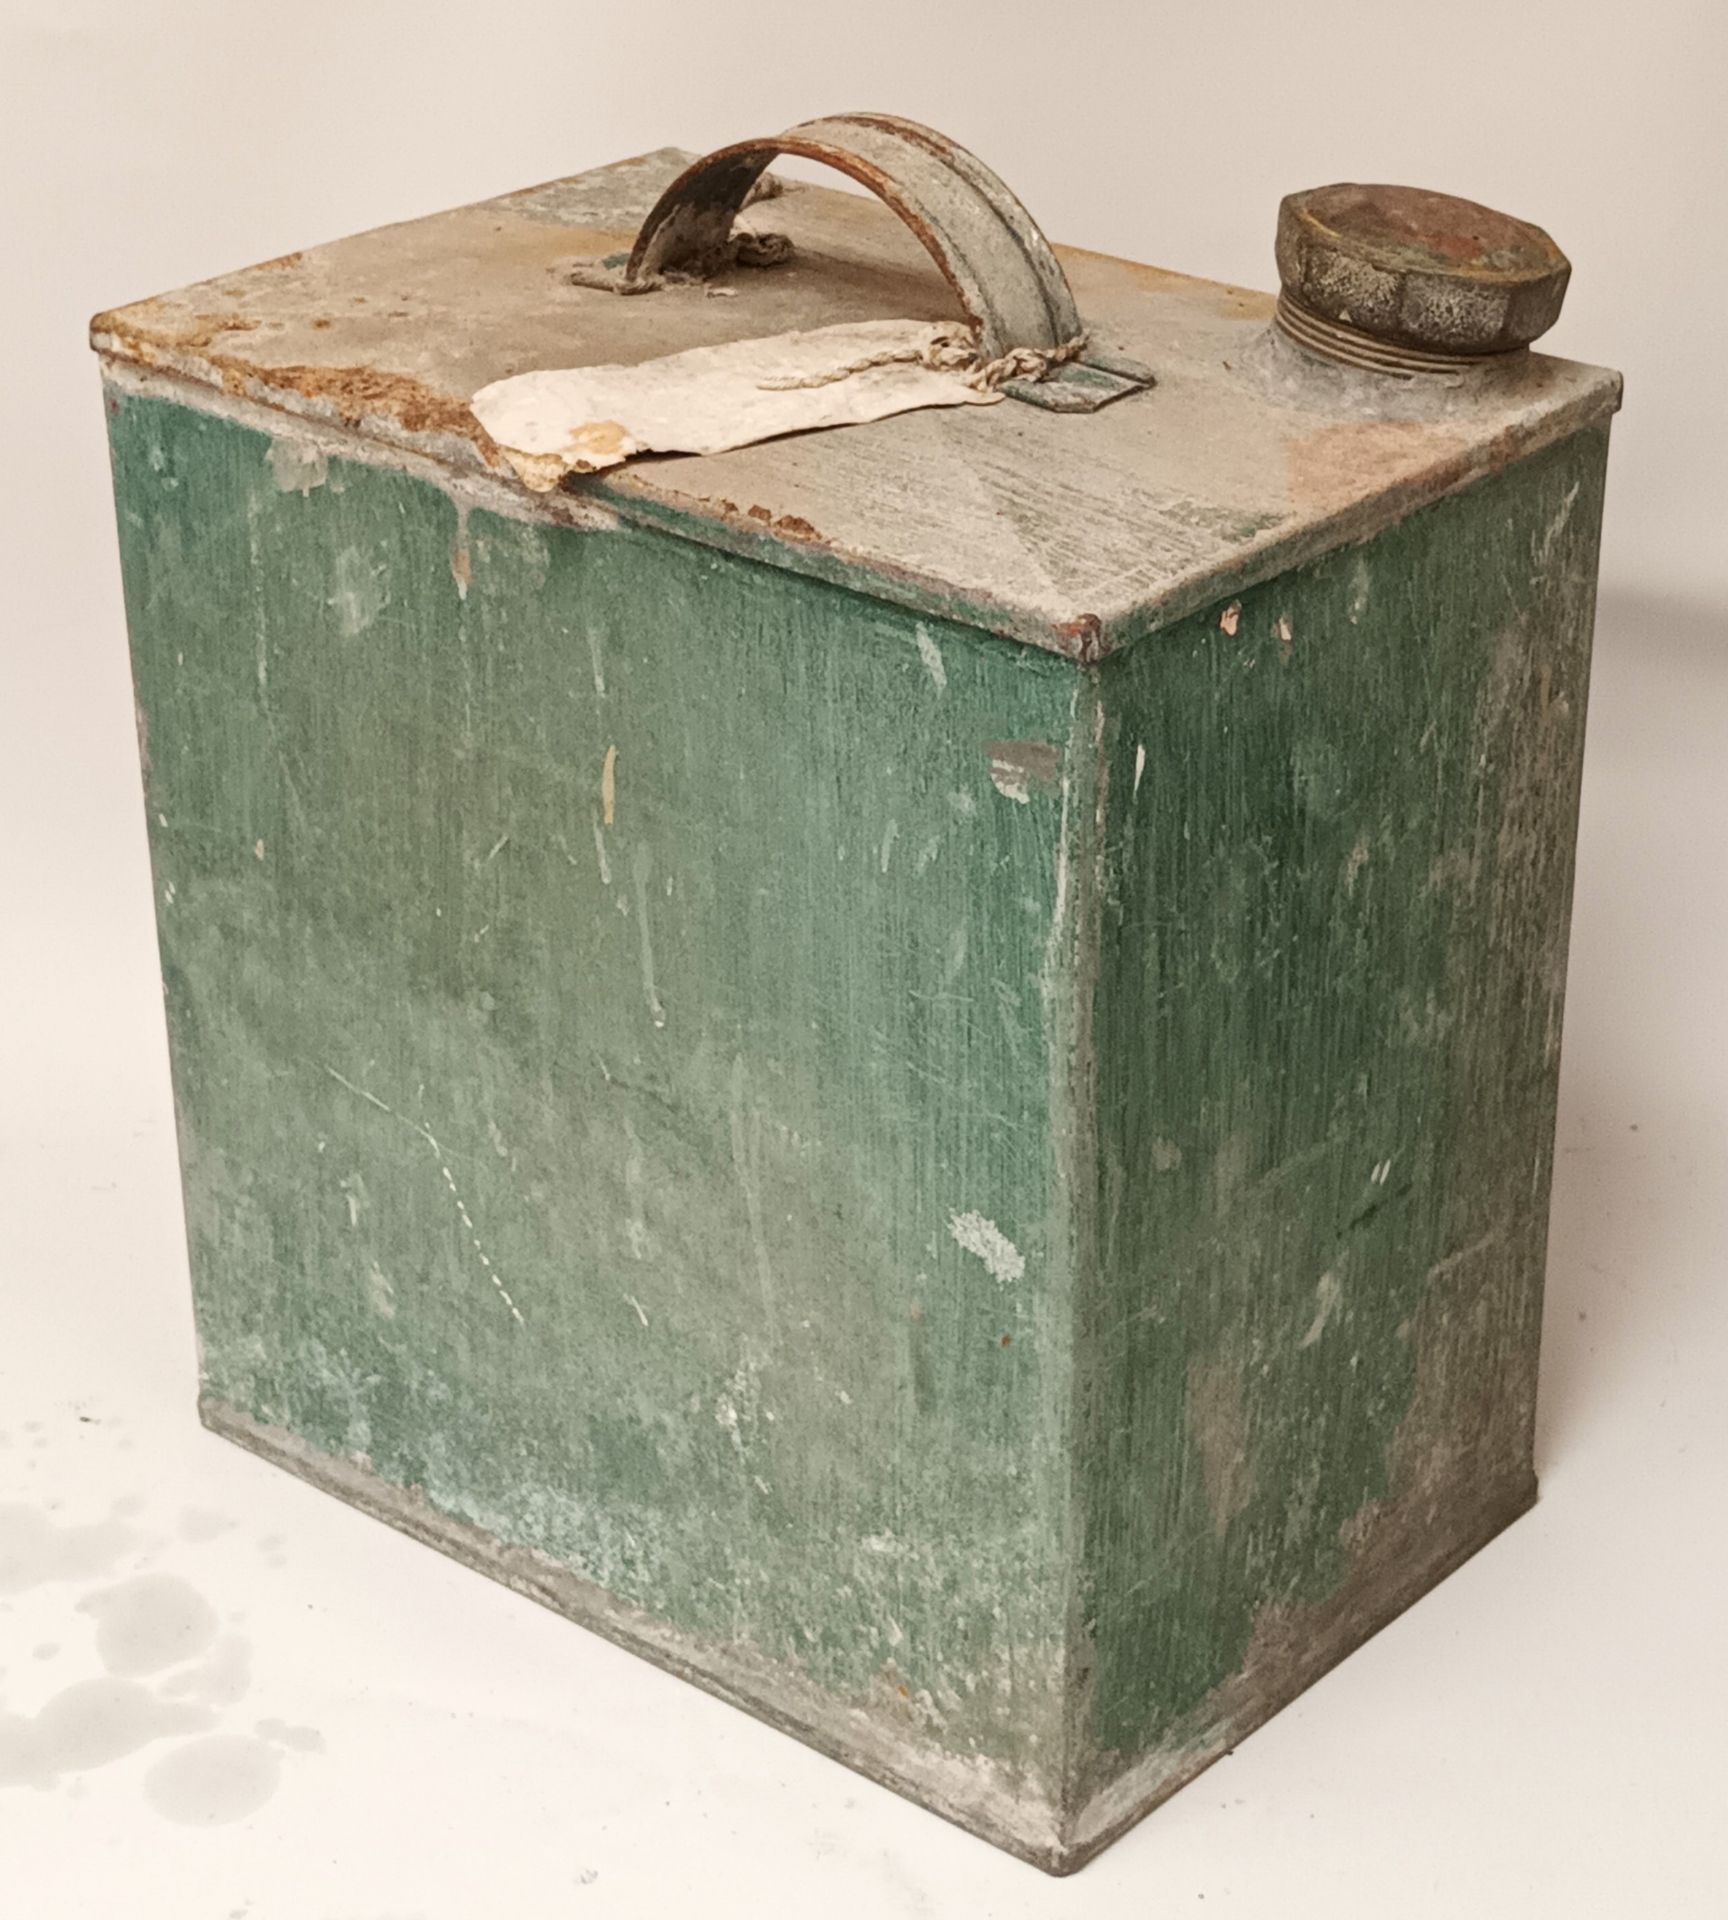 A Vintage petrol can, with lead soldered seams, cap